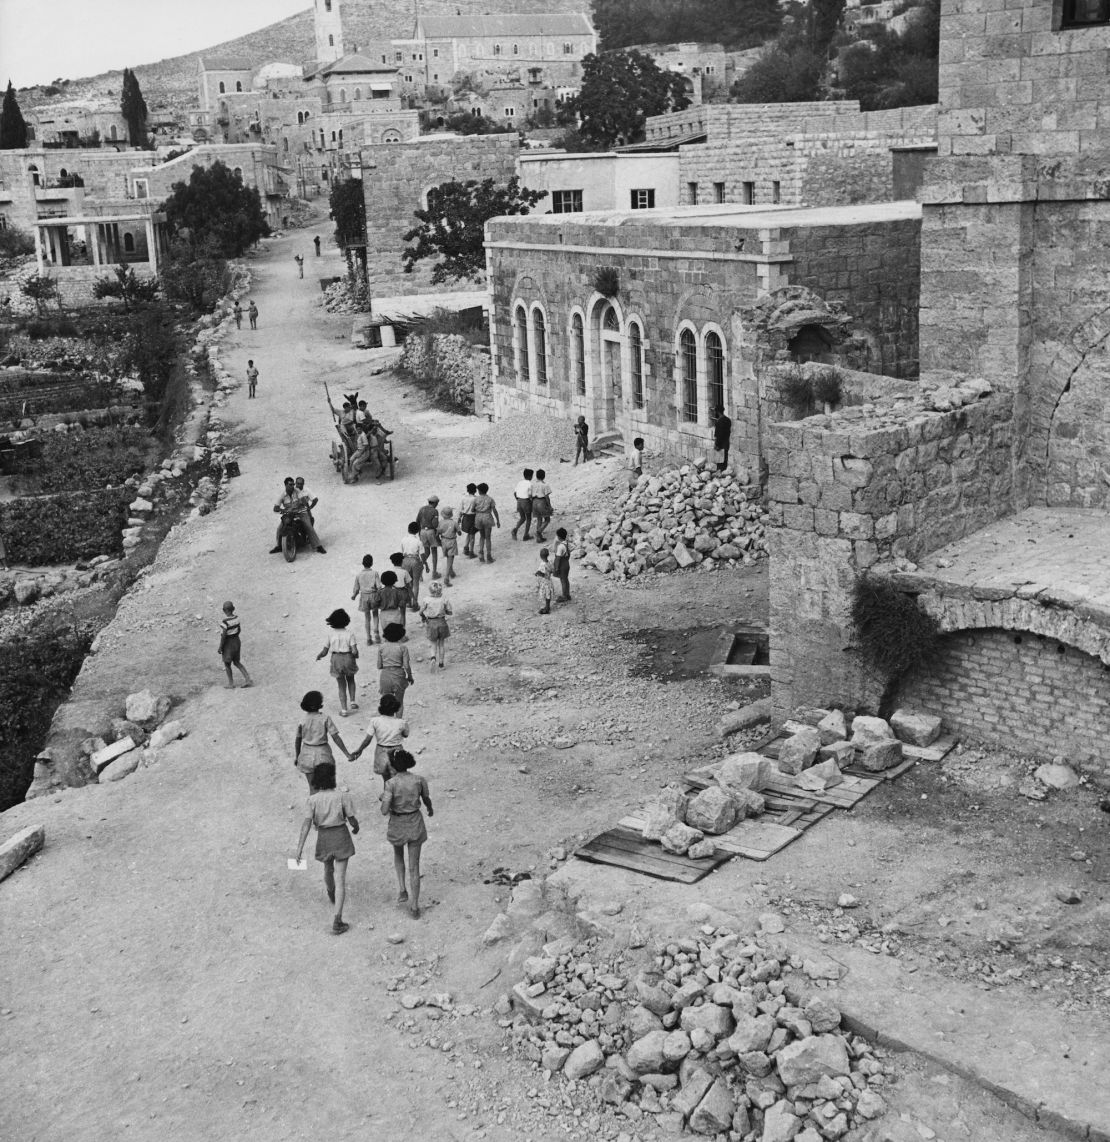 Israeli students on their way to school in Ein Karem circa 1955. The buildings on the right show damage dating from the 1948 Arab-Israeli War.